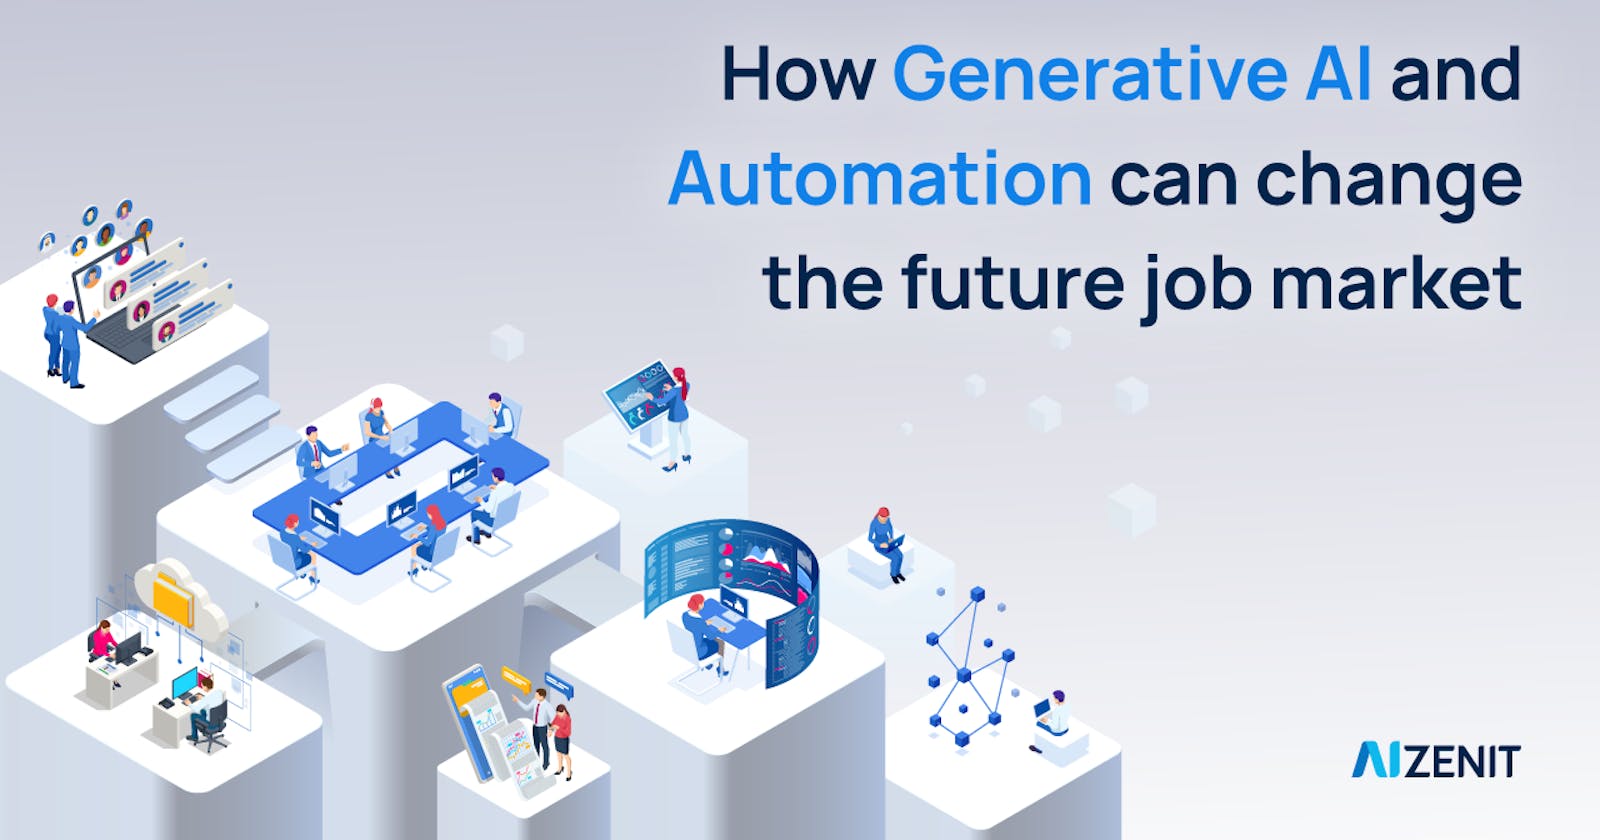 How Generative AI and Automation can change the future Job Market